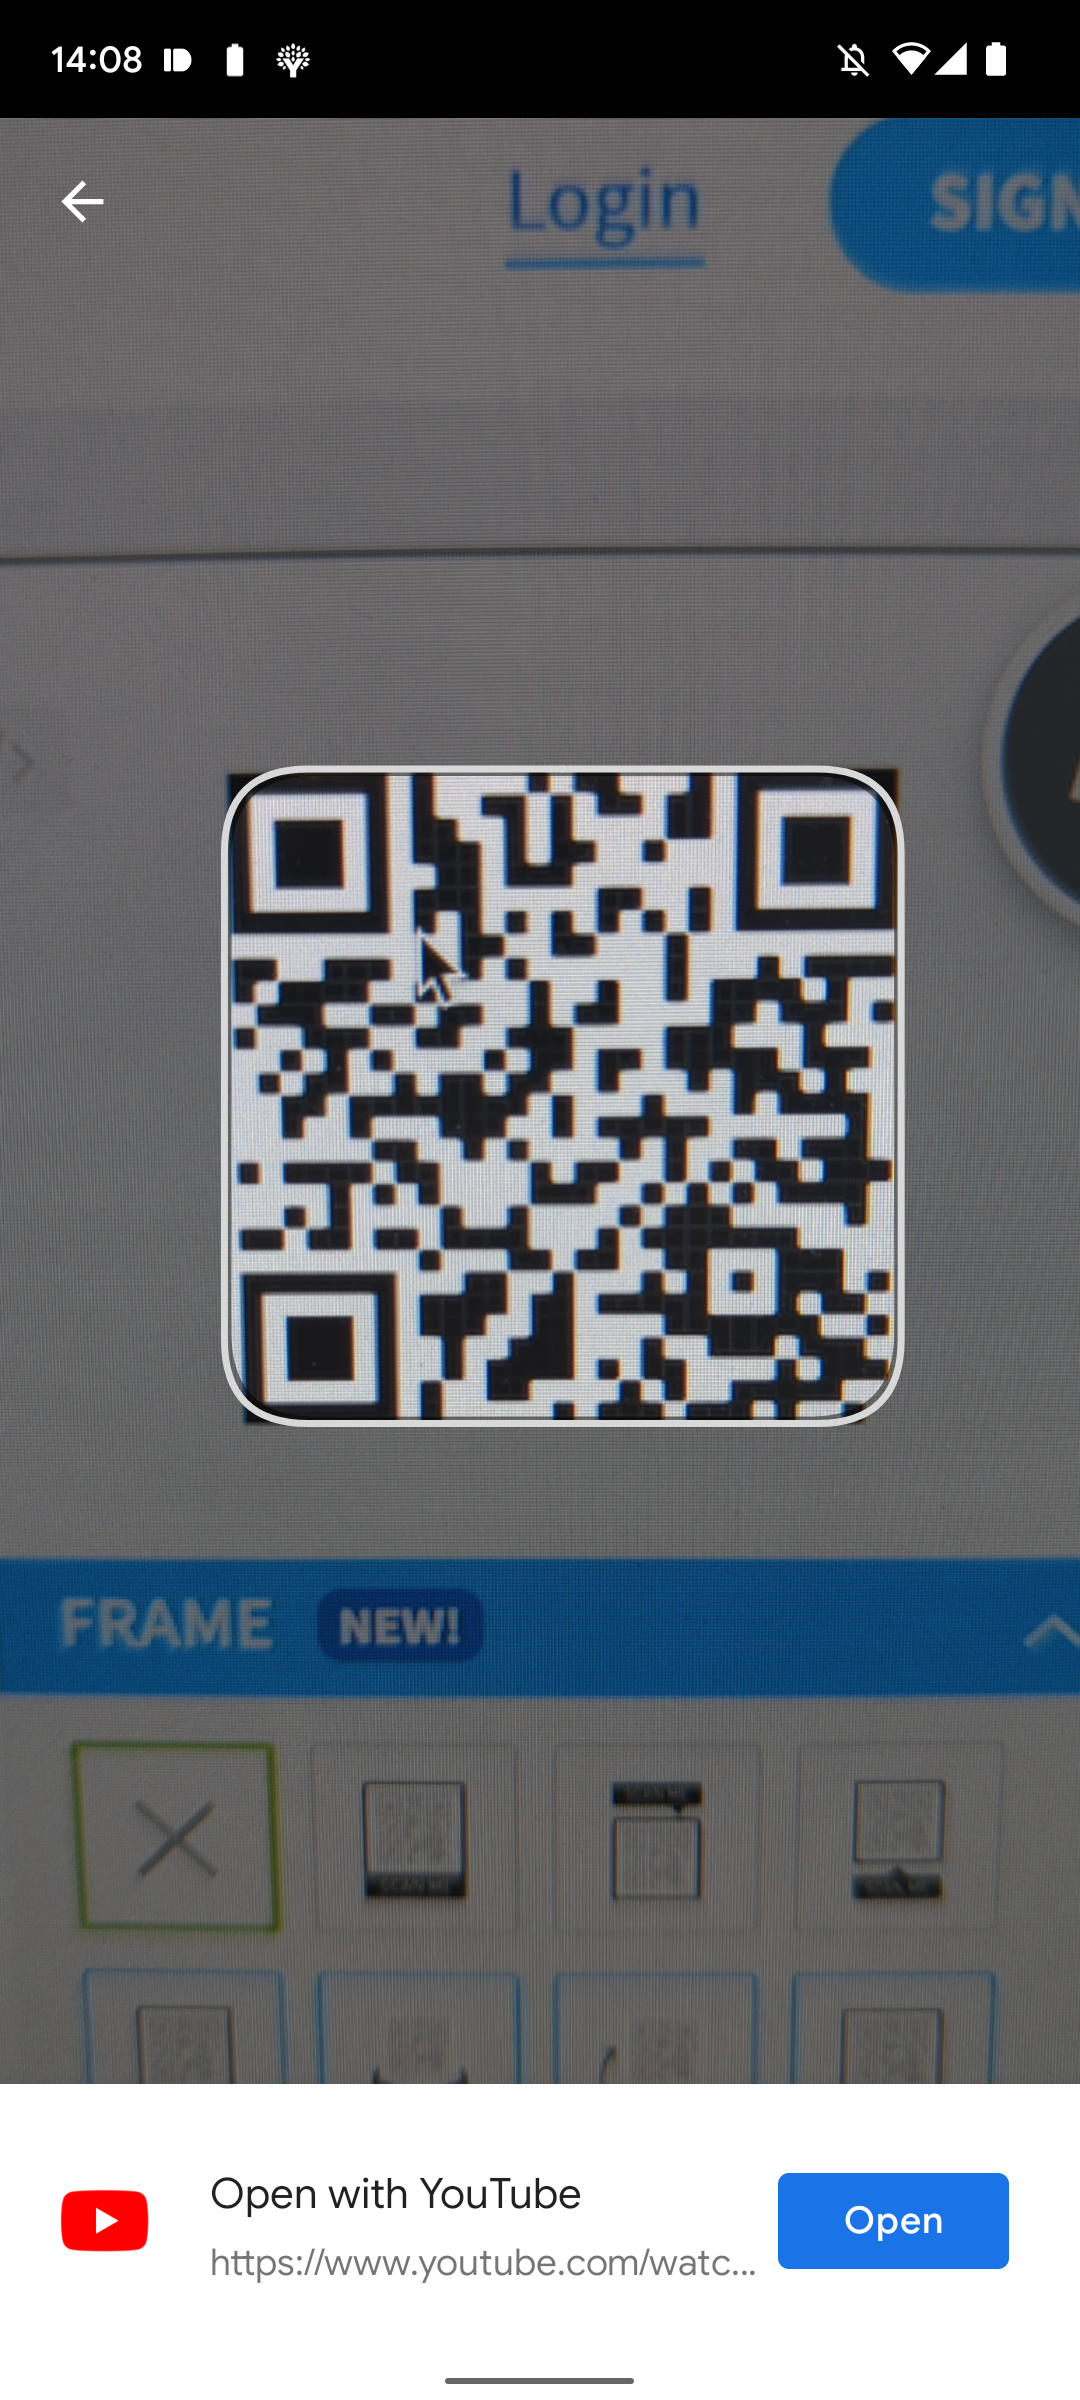 Android 13's QR code scanner's viewfinder with QR code link